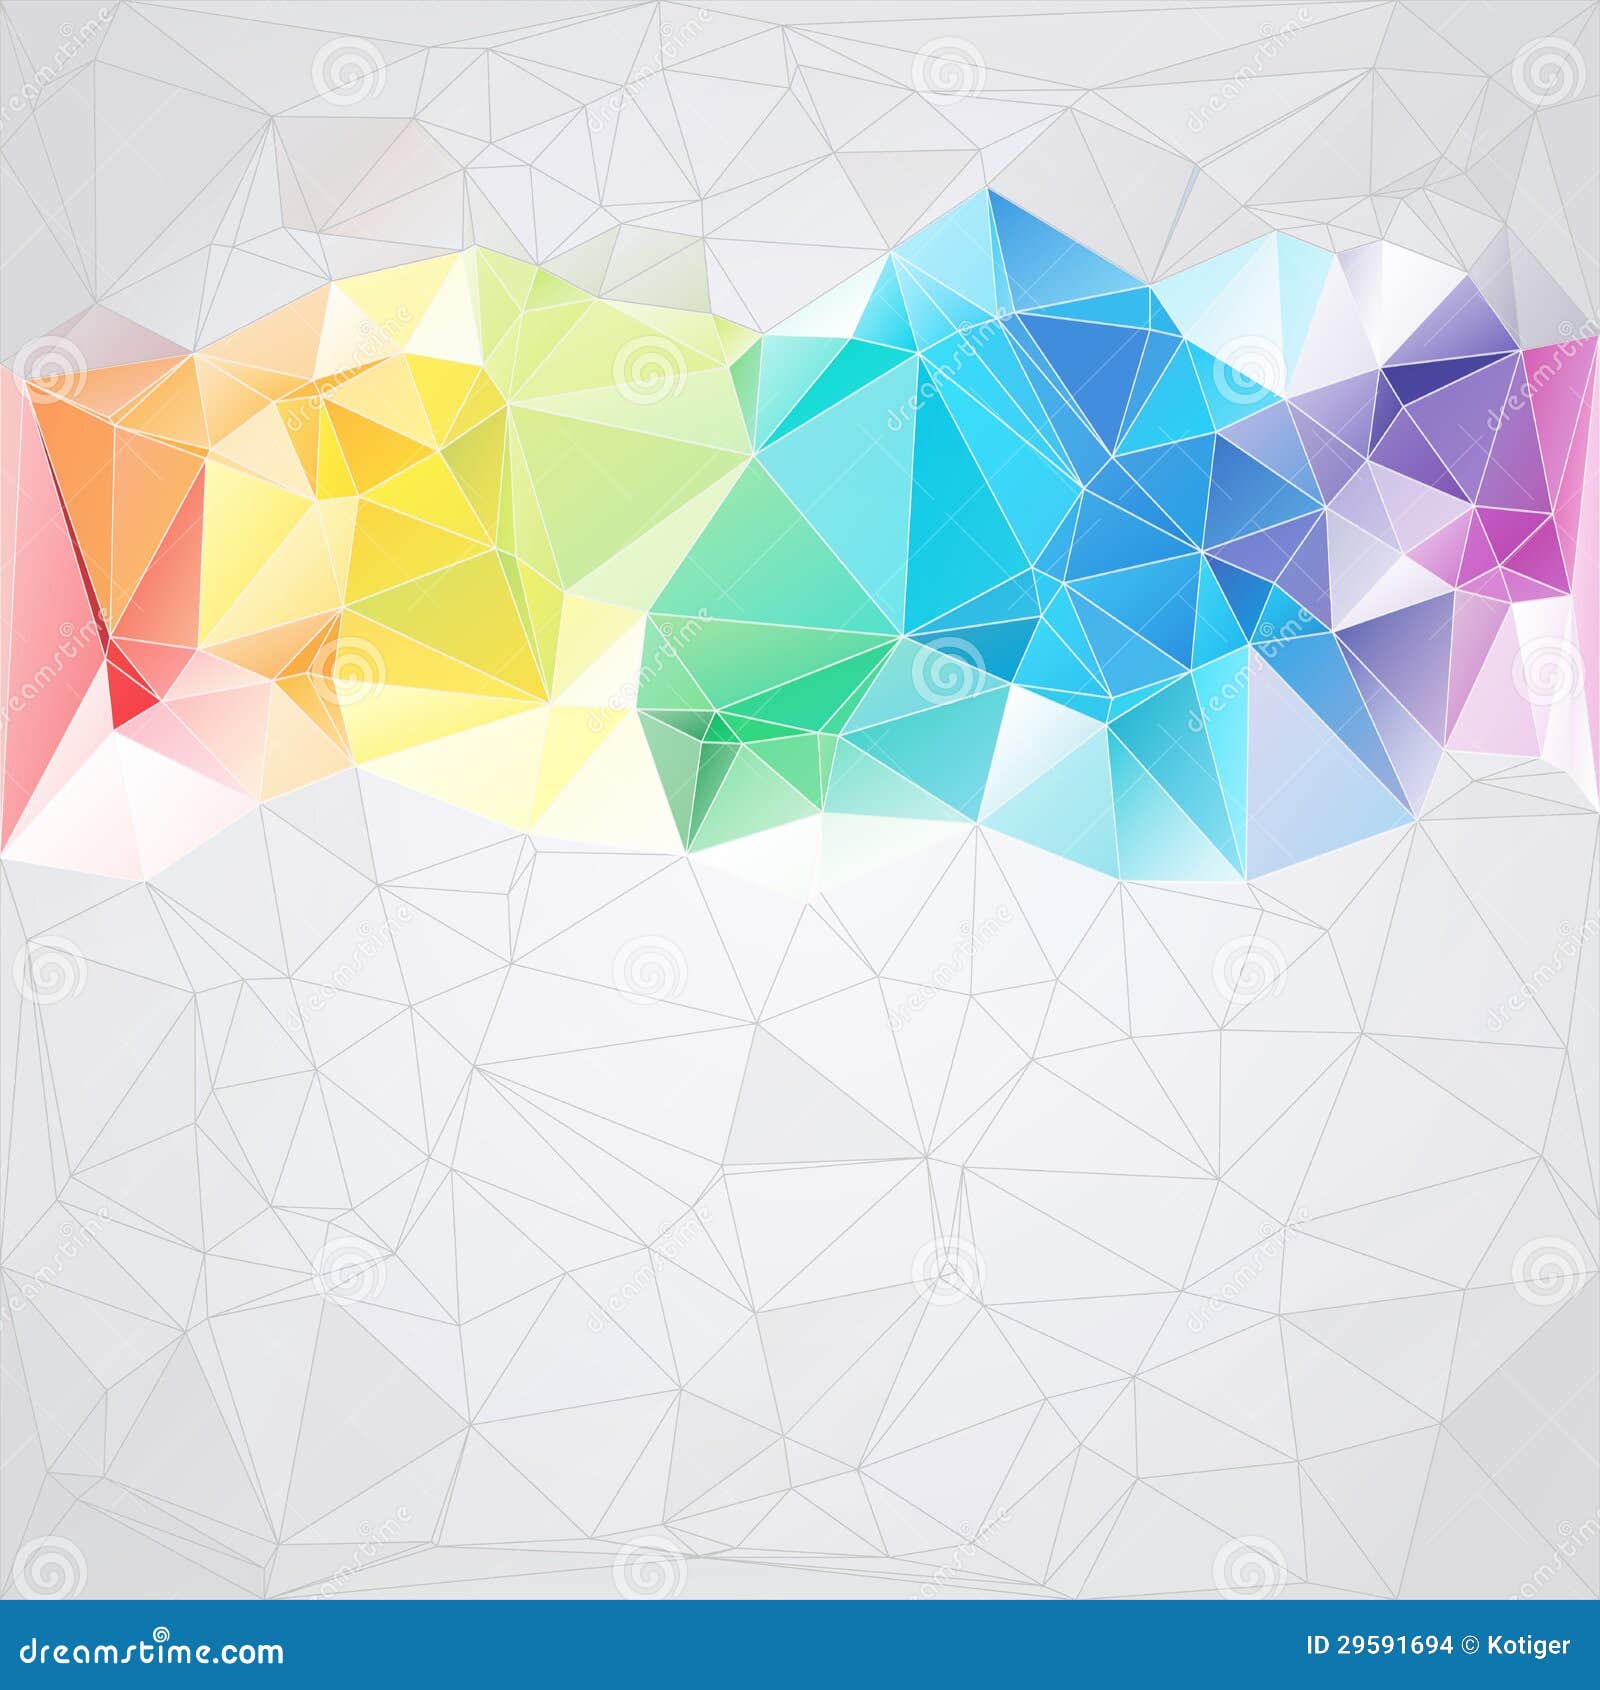 triangular style abstract background of triangles